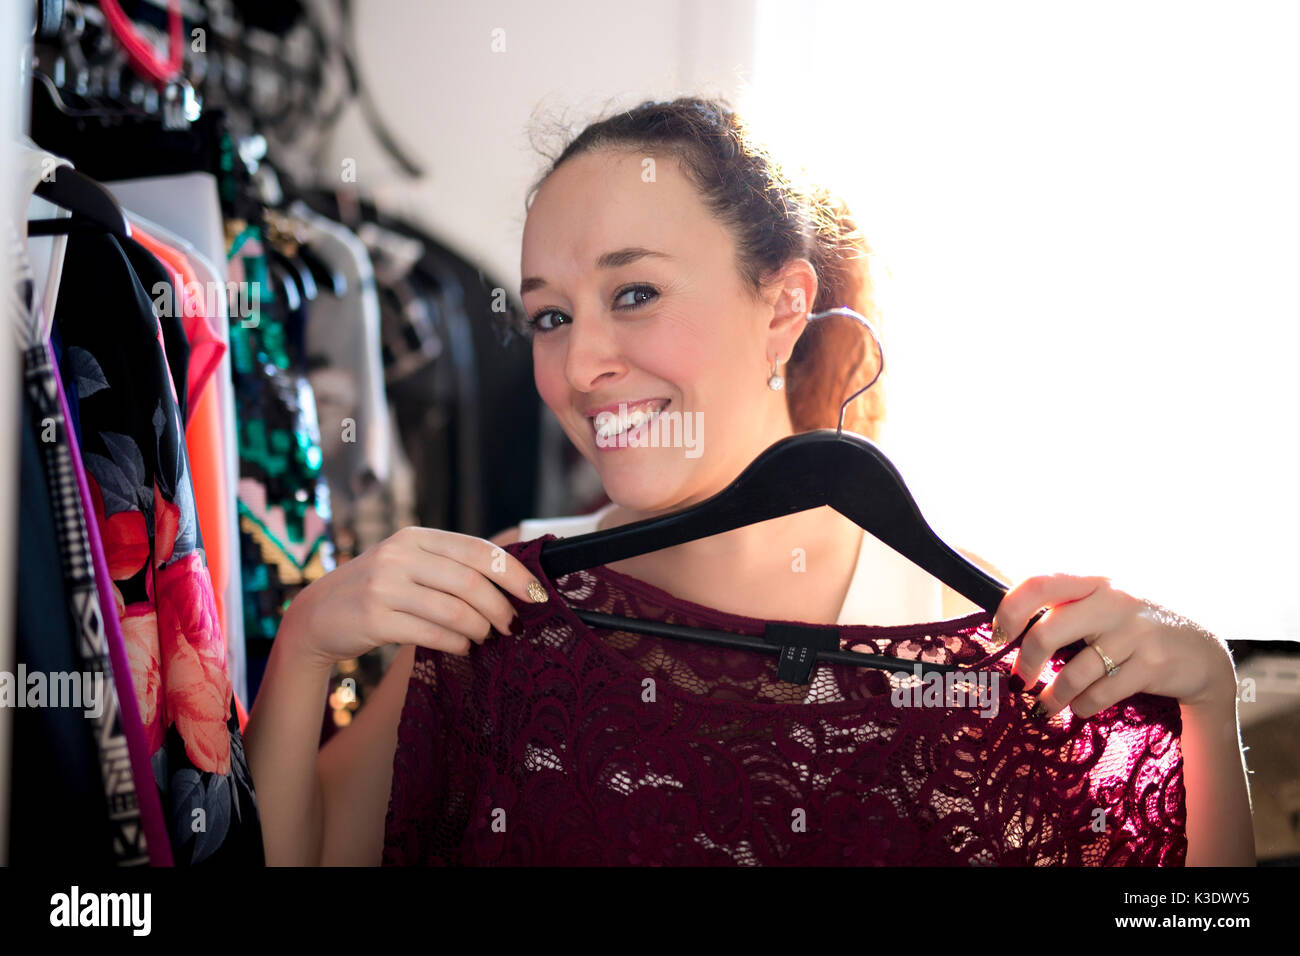 Young woman choosing an outfit to wear. Stock Photo